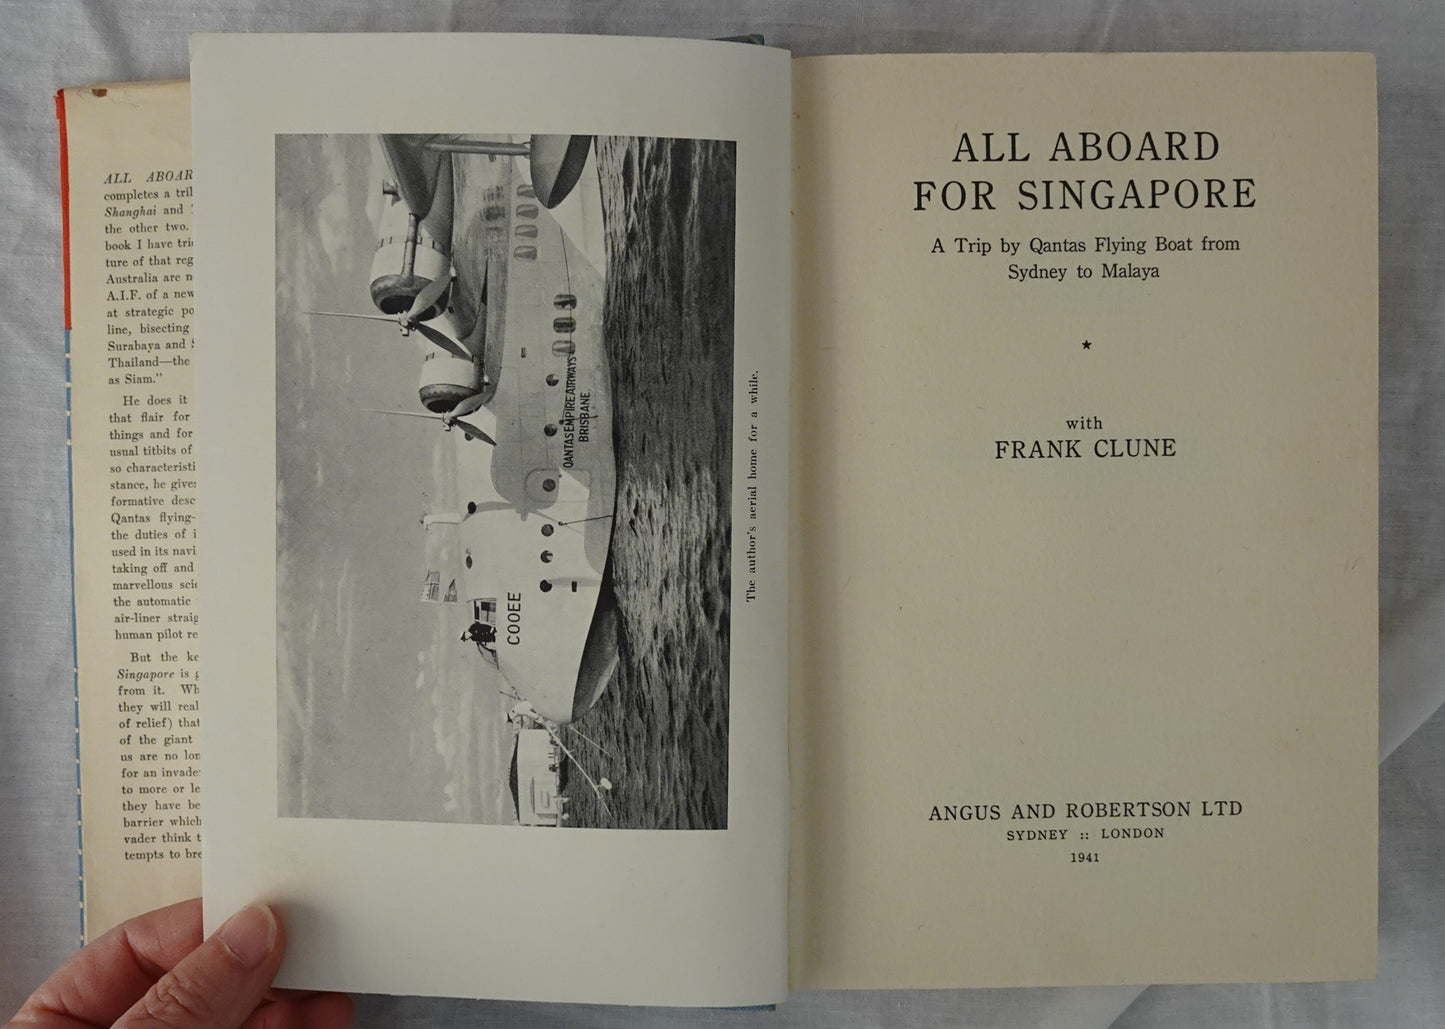 All Aboard for Singapore by Frank Clune